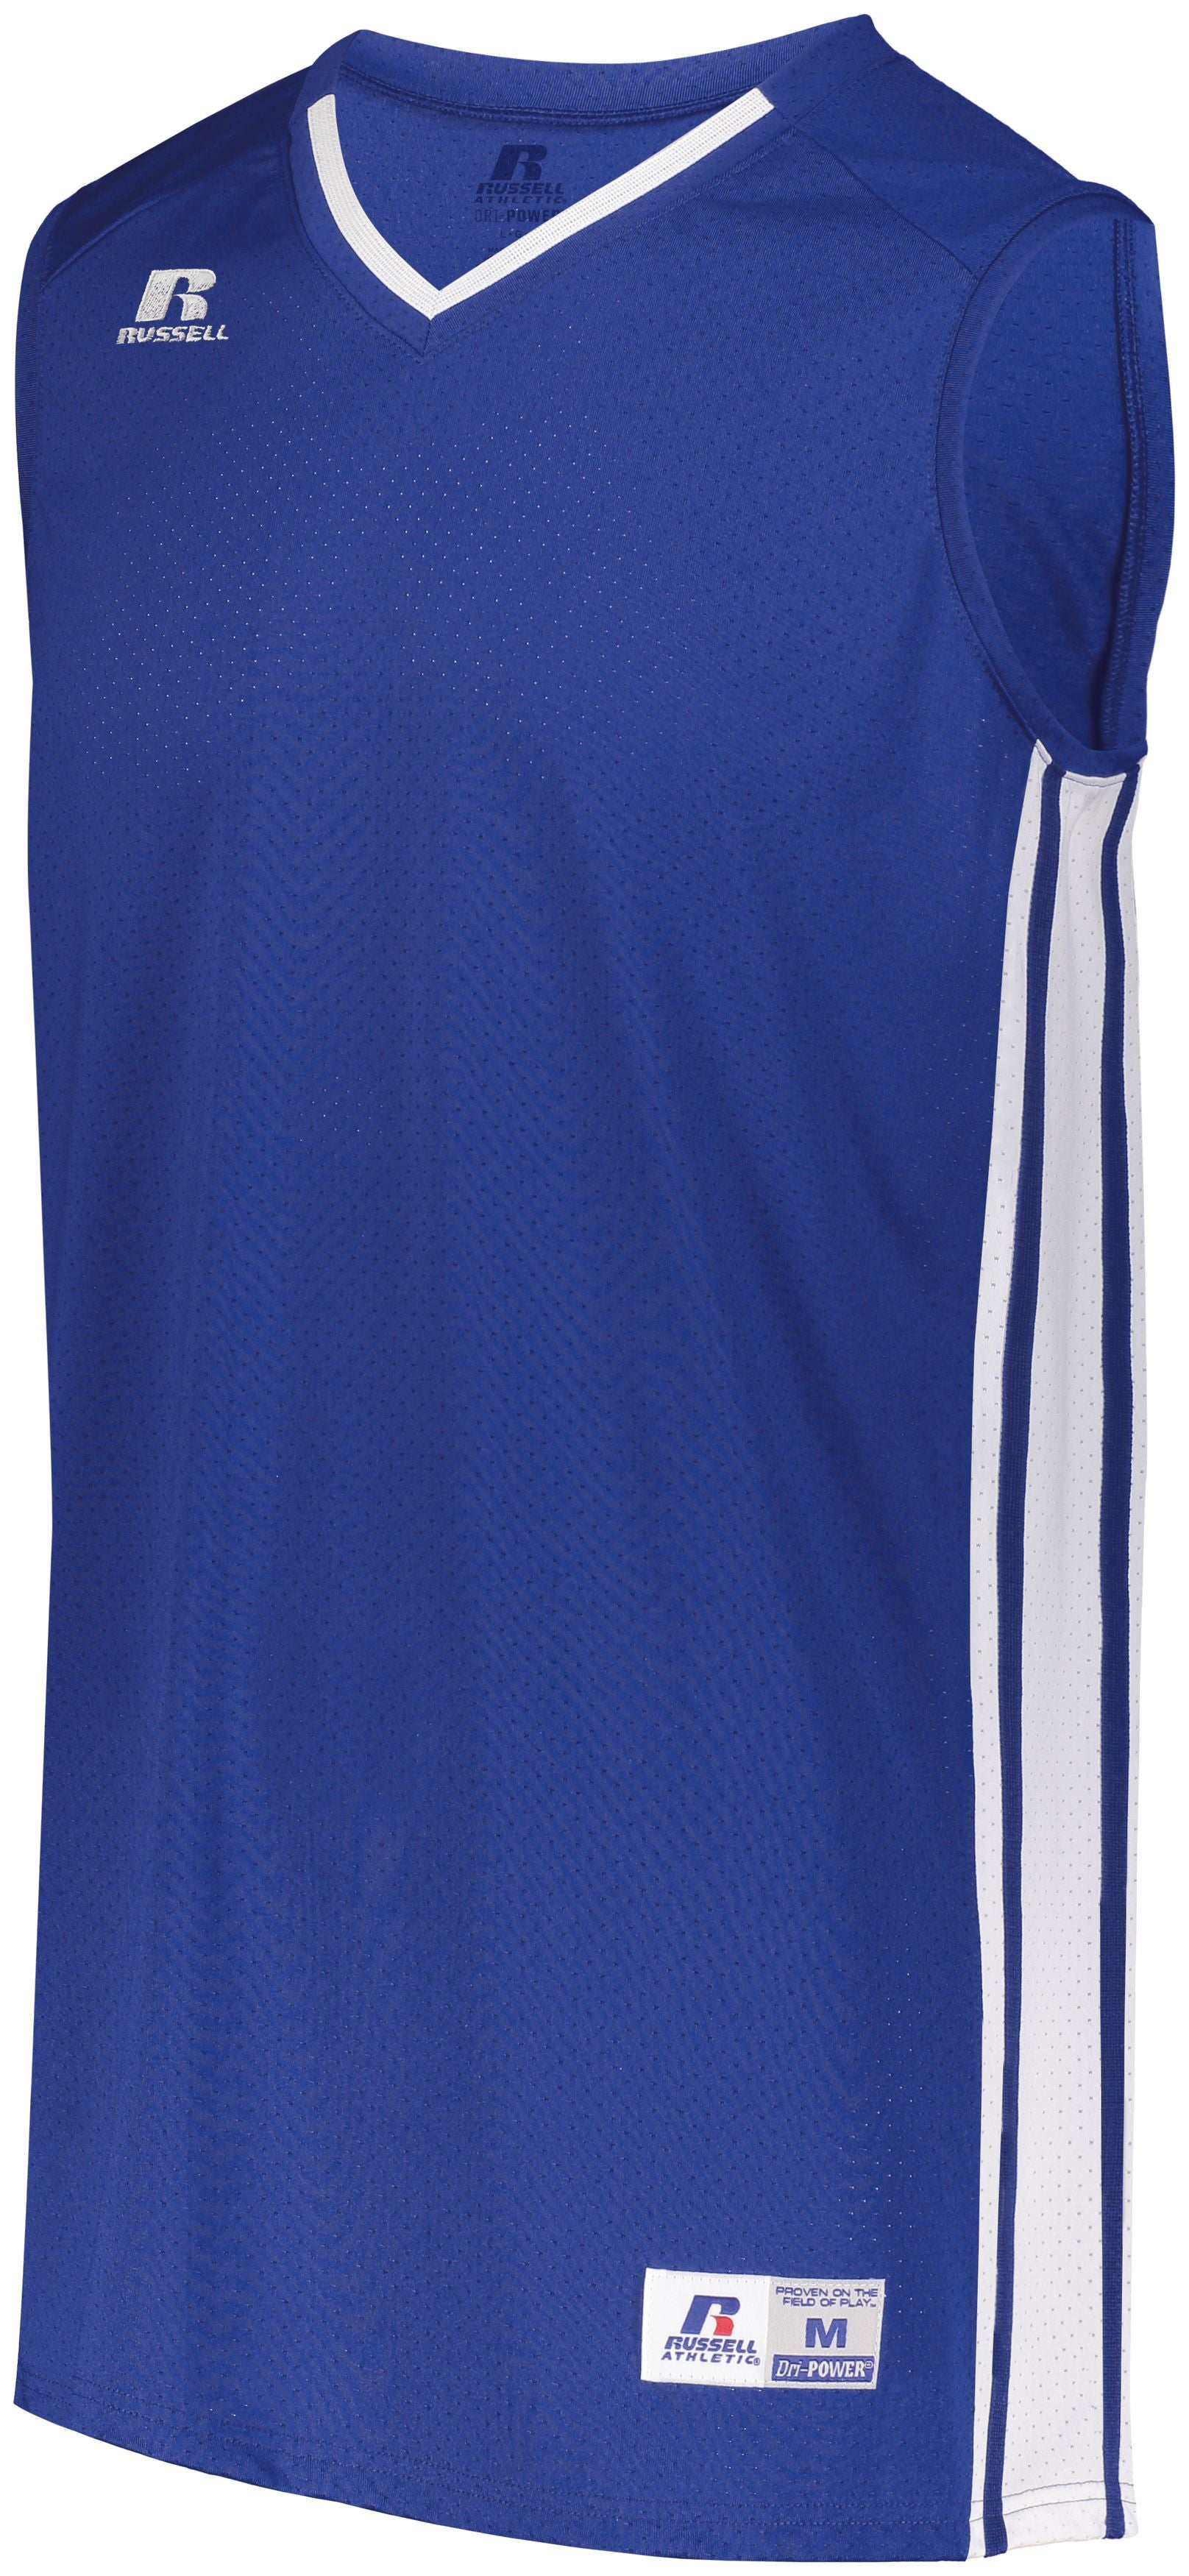 Russell Athletic Youth Legacy Basketball Jersey in Royal/White  -Part of the Youth, Youth-Jersey, Basketball, Russell-Athletic-Products, Shirts, All-Sports, All-Sports-1 product lines at KanaleyCreations.com